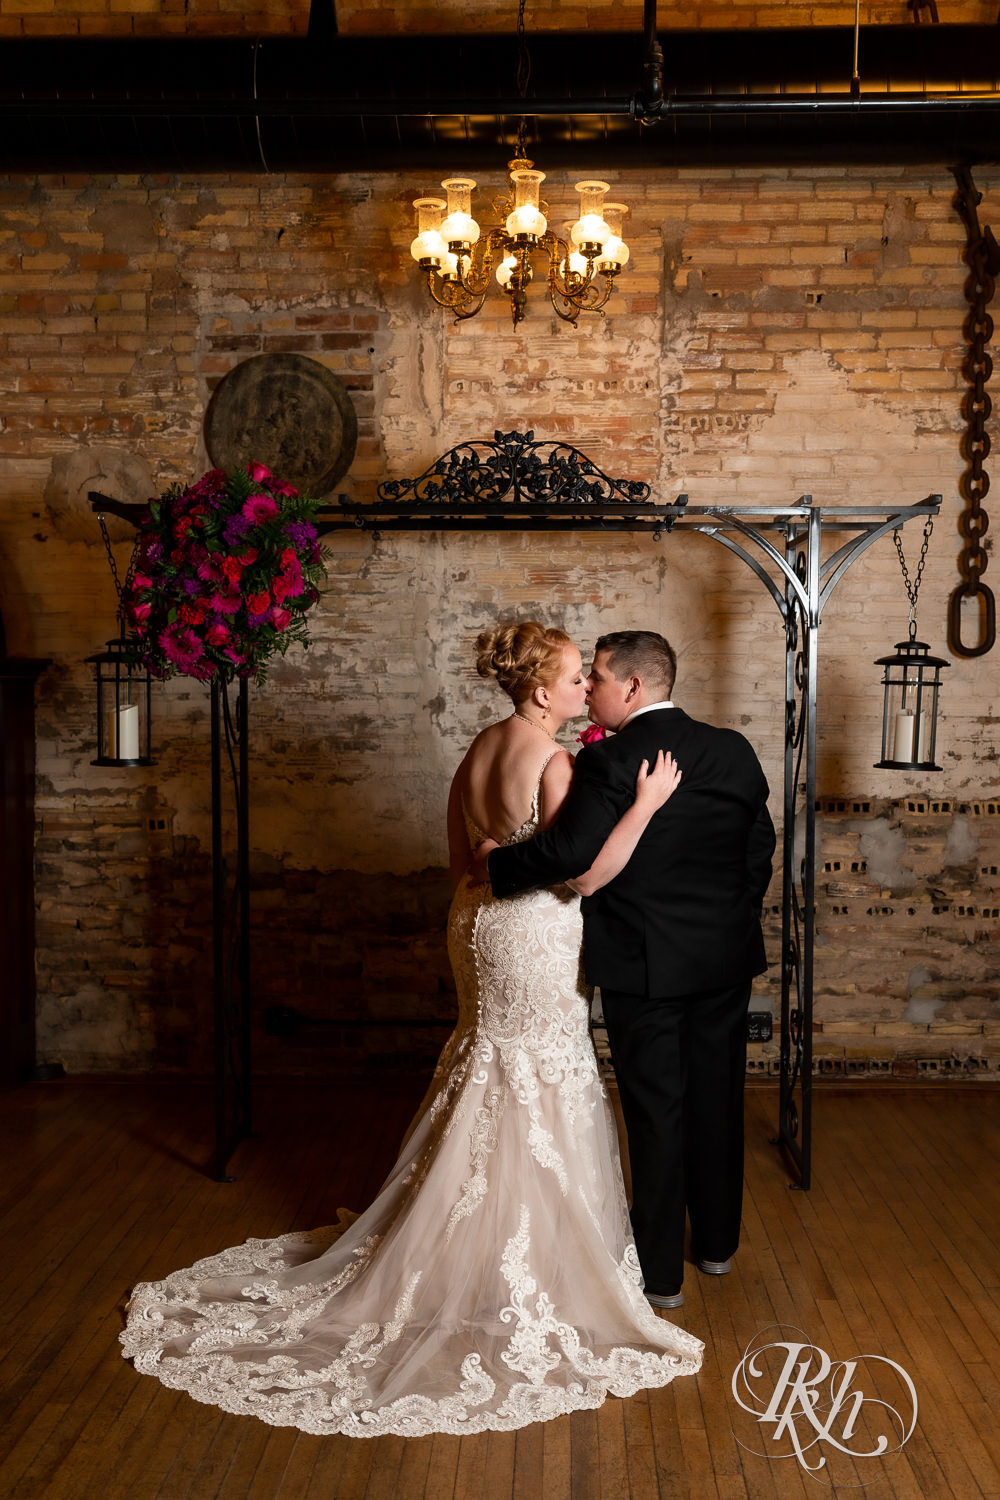 Bride and groom kiss at alter at Kellerman's Event Center in White Bear Lake, Minnesota.